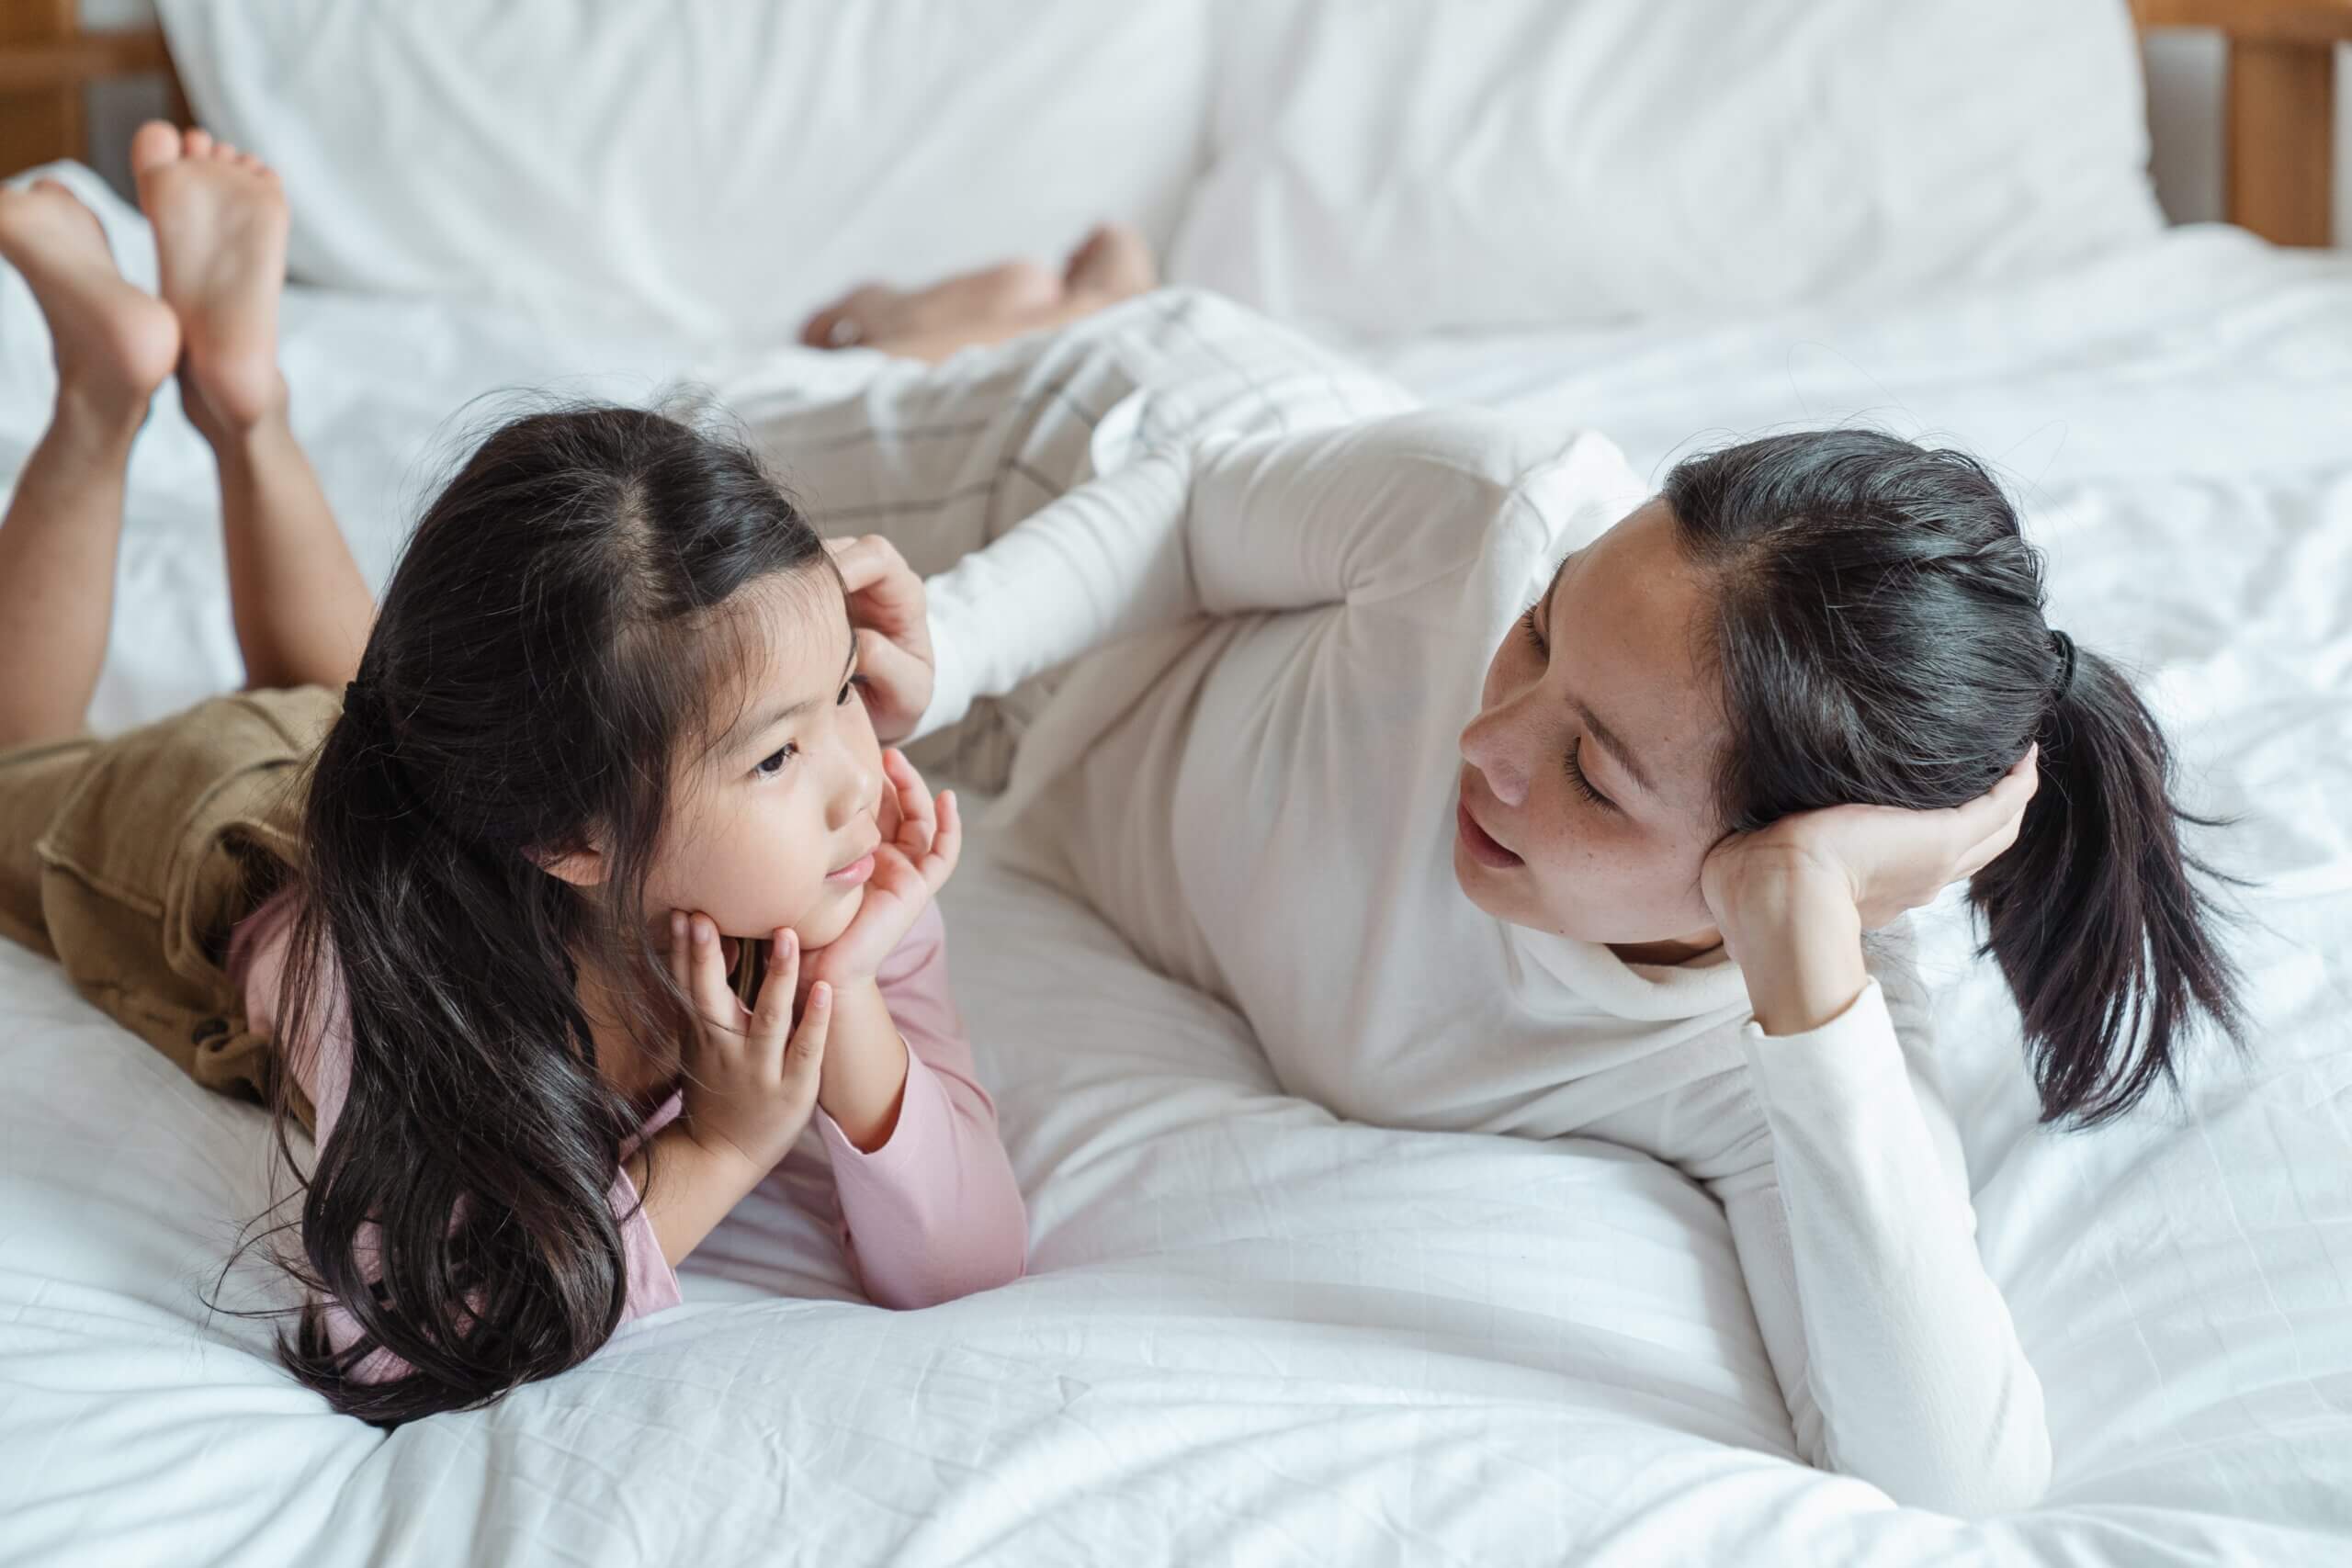 A mom and daughter talking on a bed.